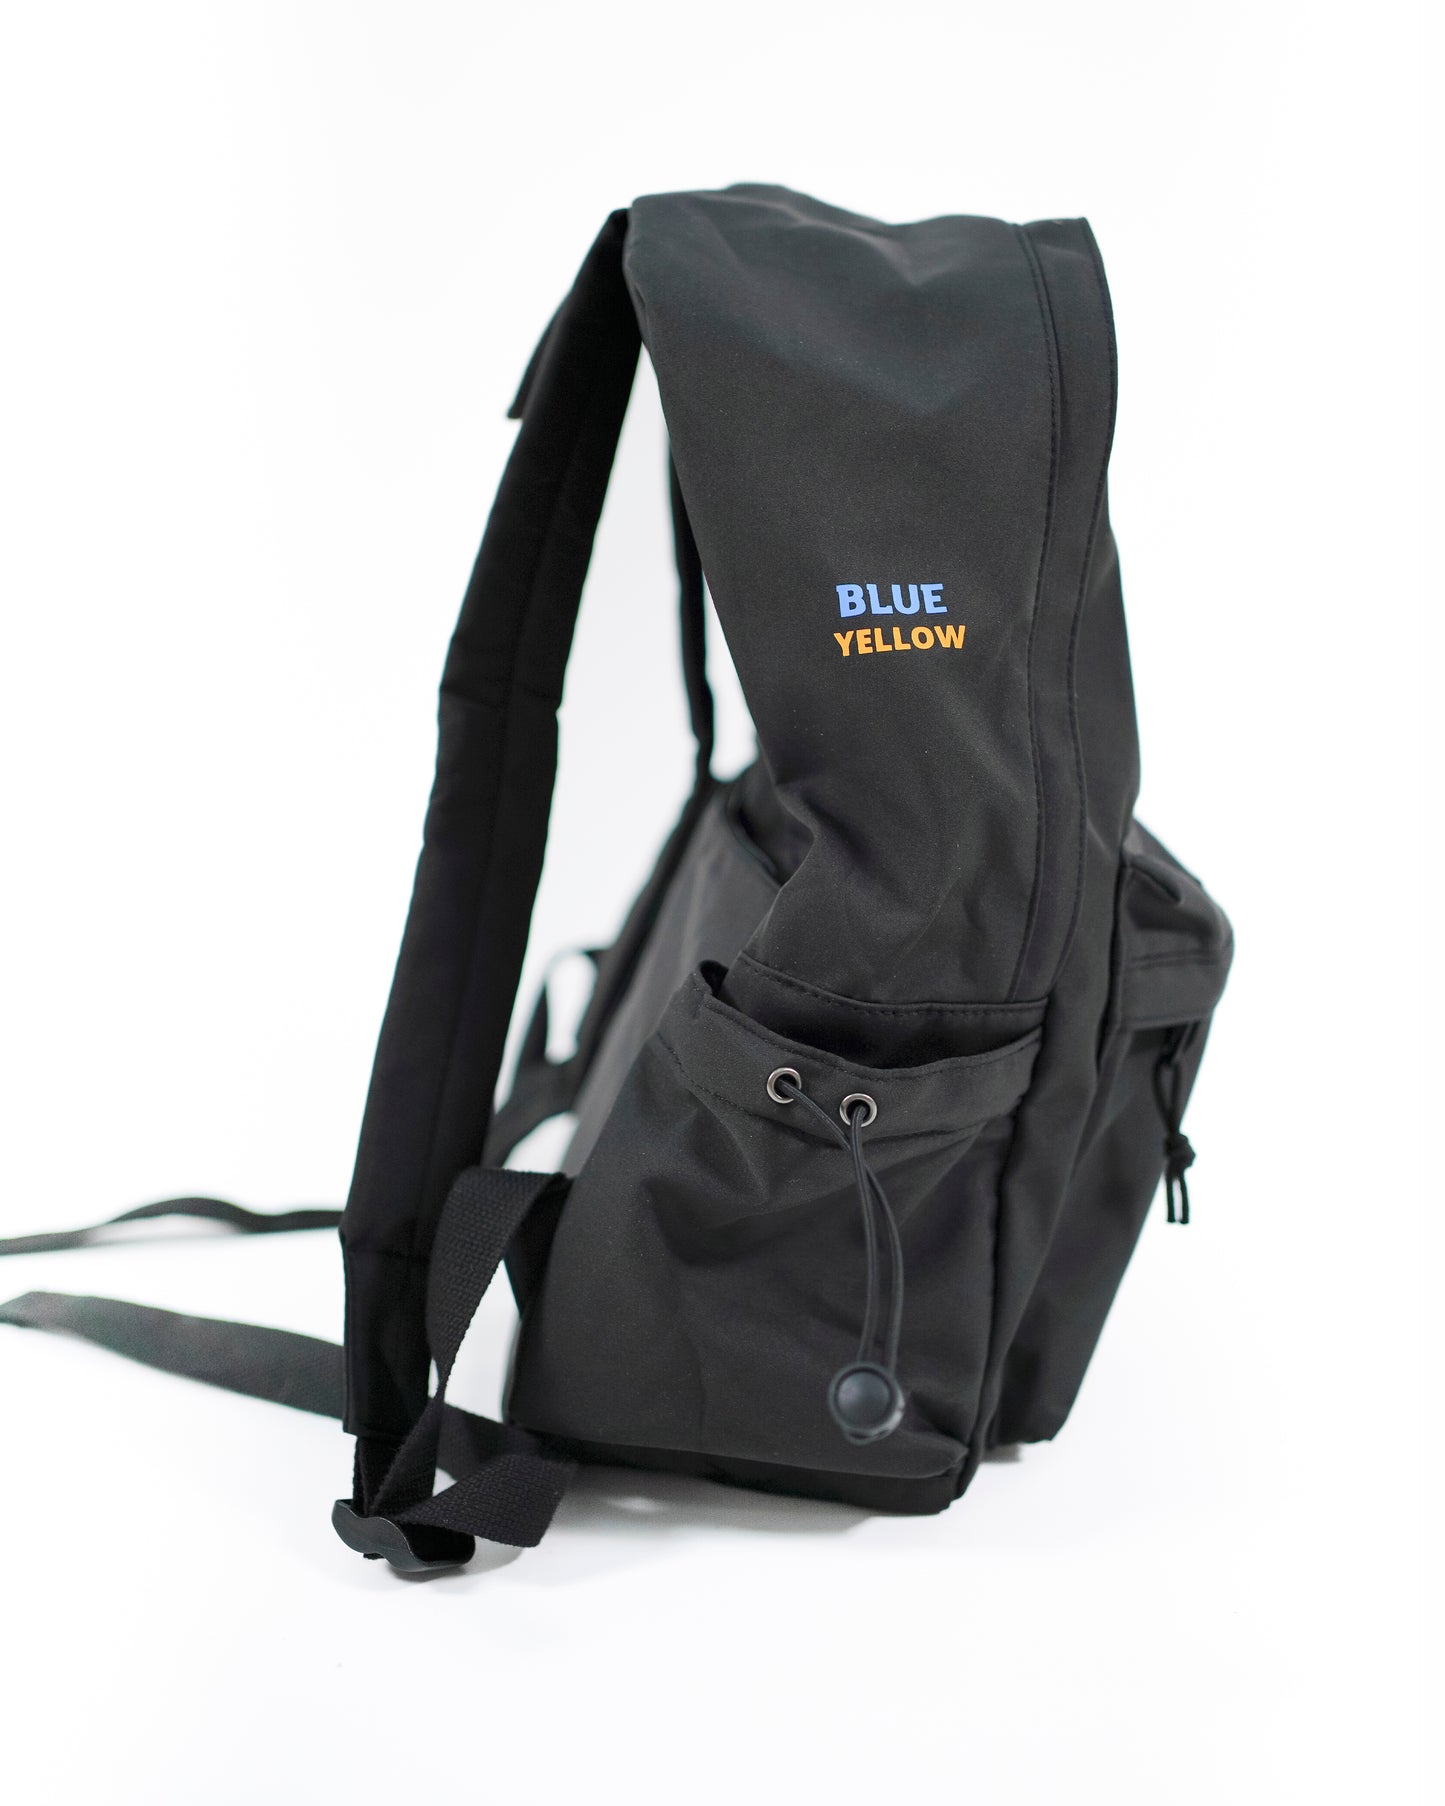 Backpack with Black Embroidered Truzyb | Ukrainian Trident Backpack